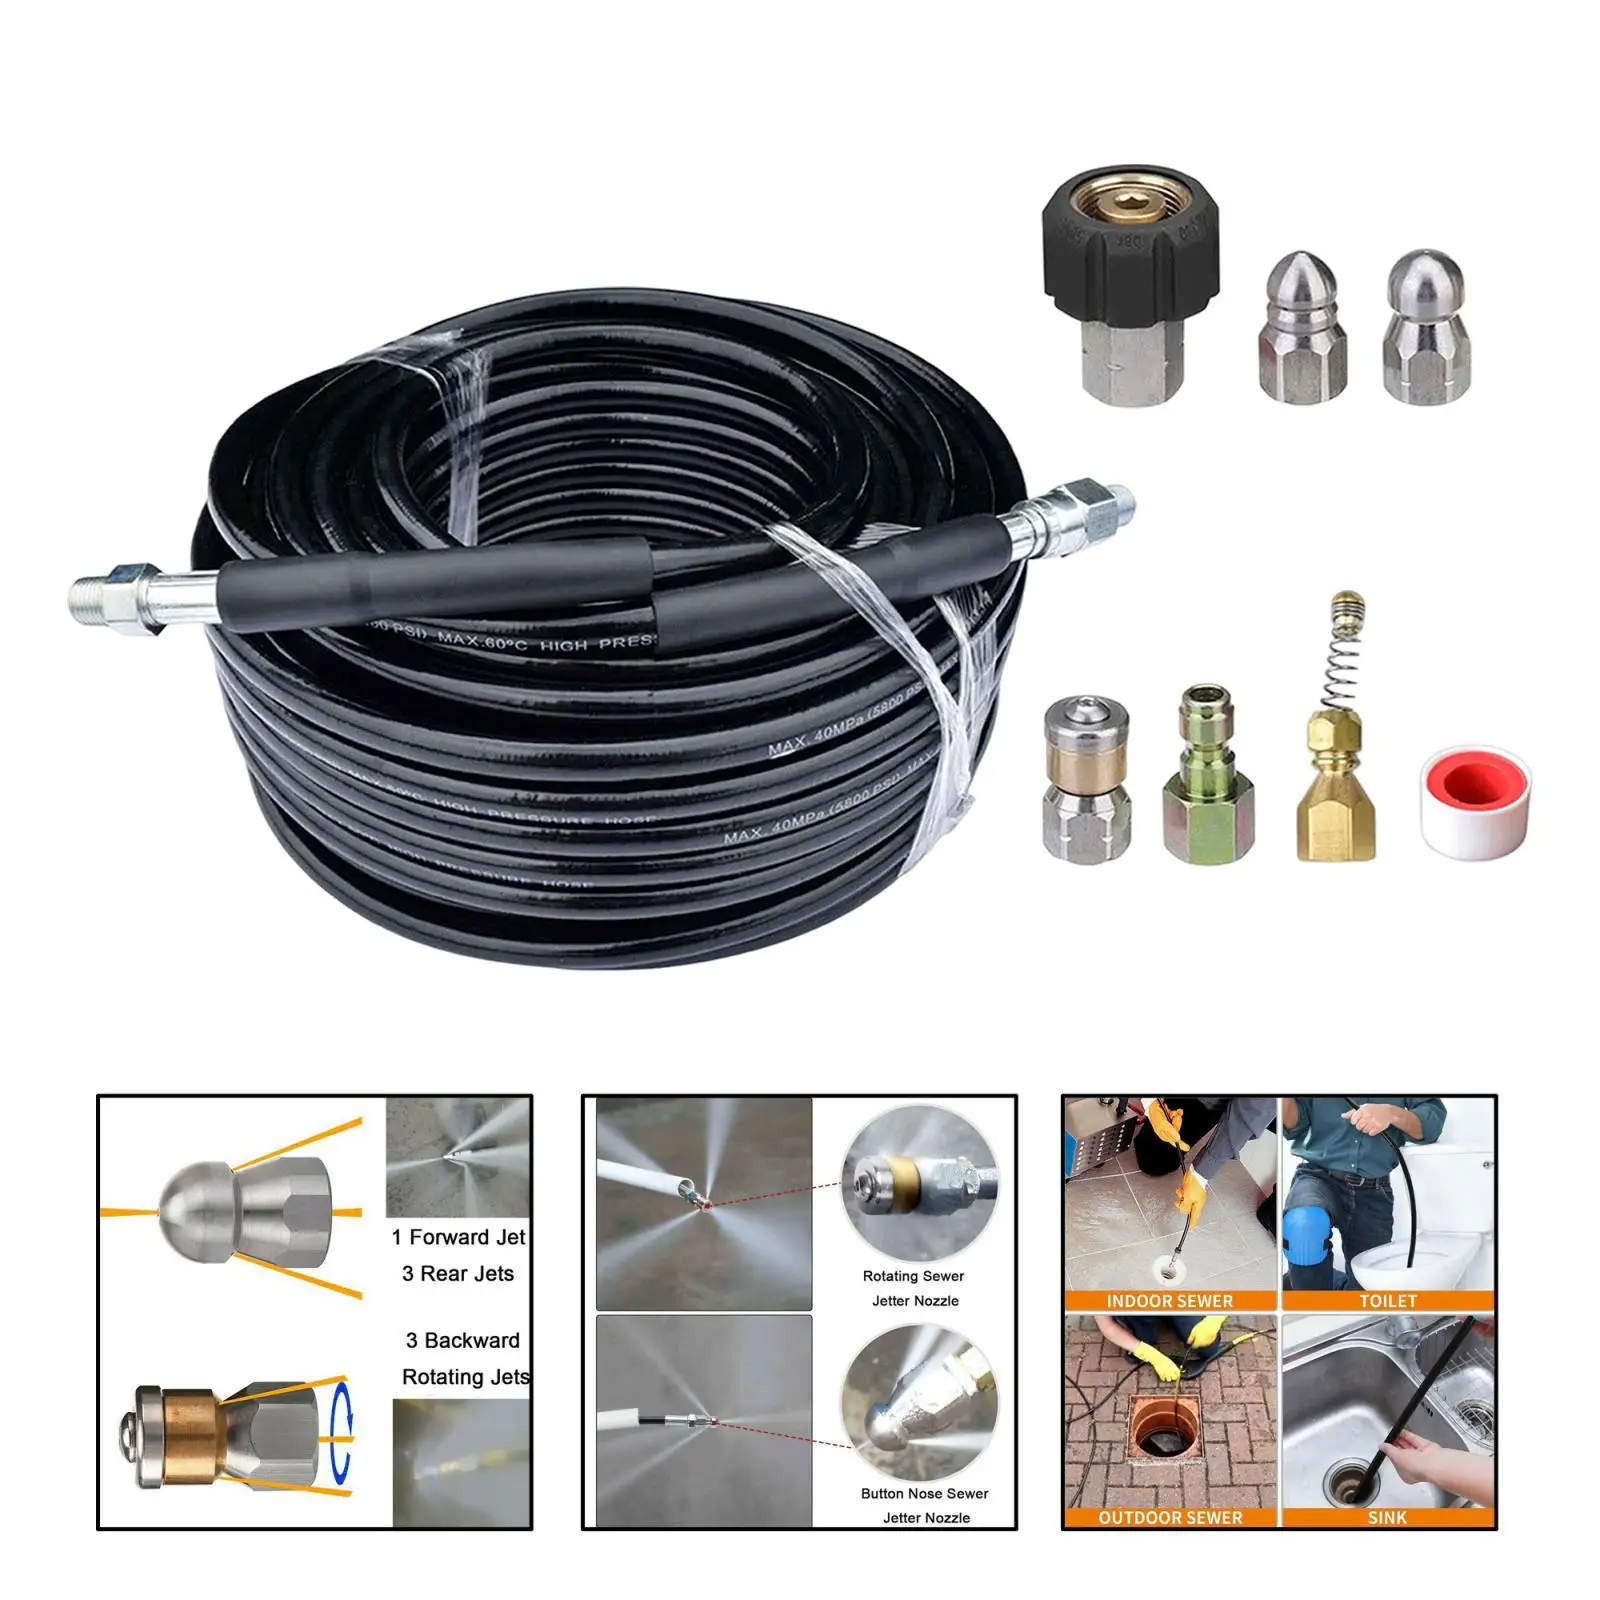 15M/50Ft High Pressure Washer Hose Lance with Washing Nozzle Drain Pipe Cleaning Hose Sewer Jetter set